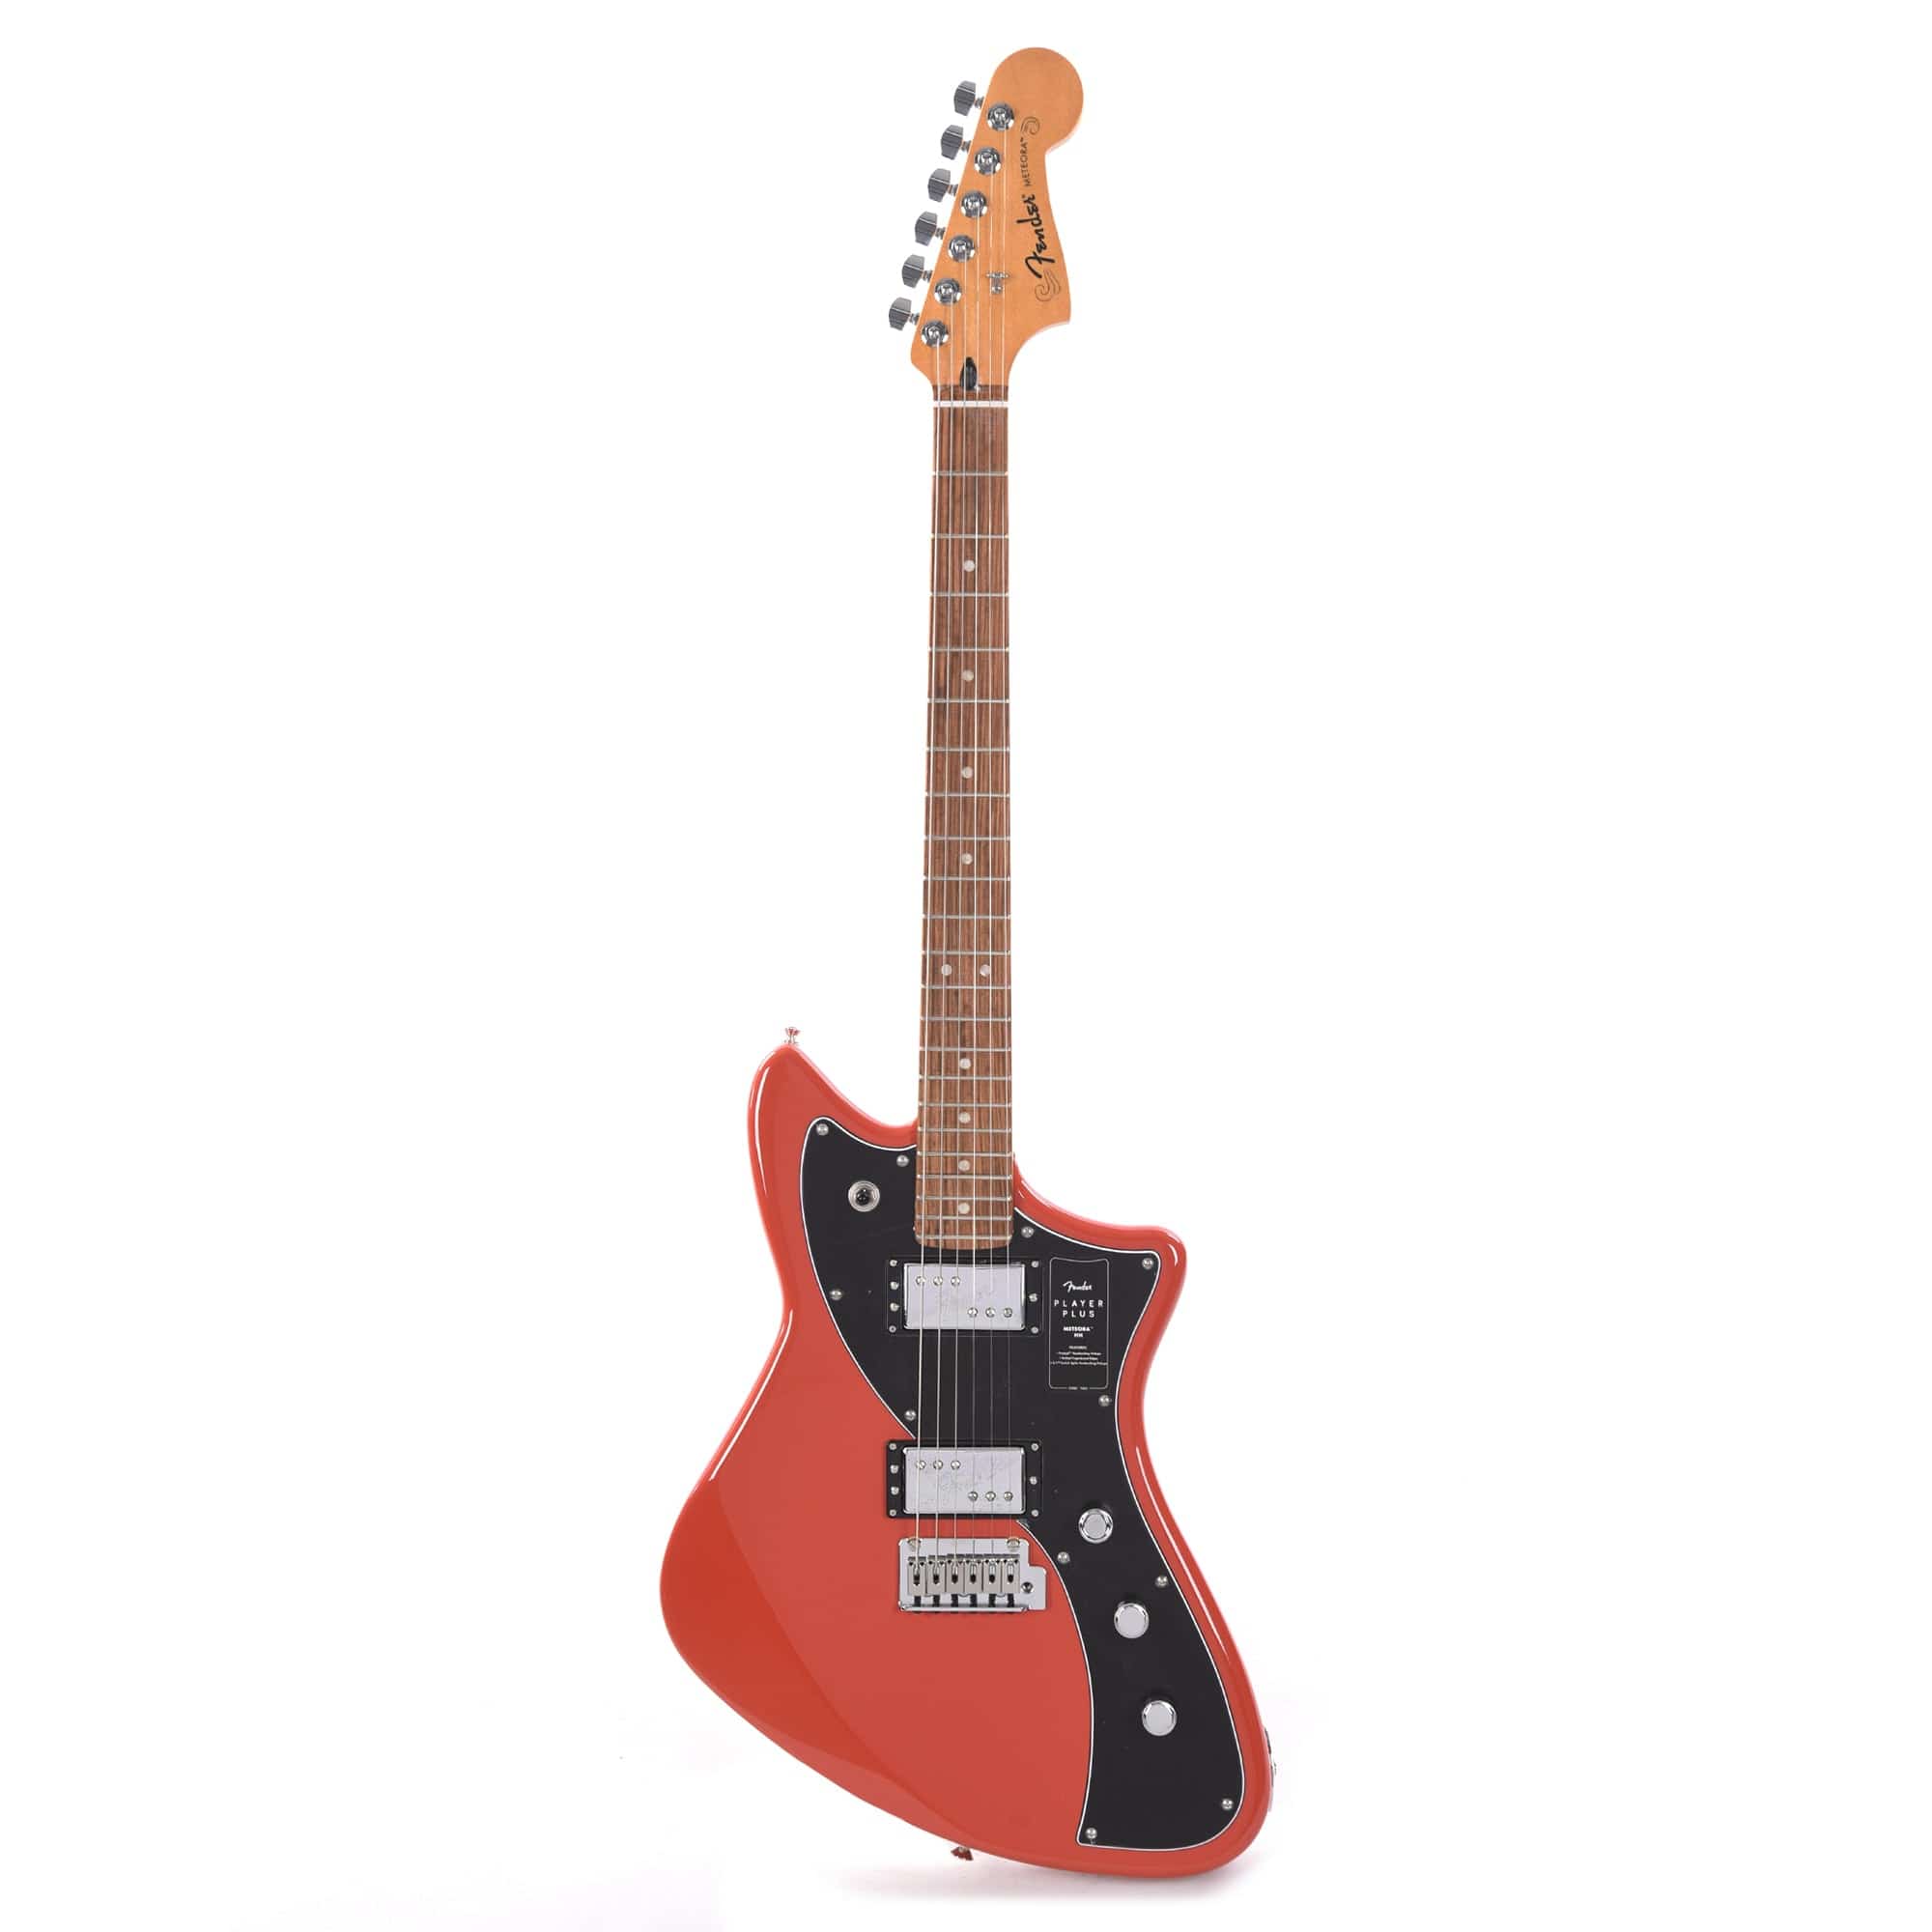 Fender Player Plus Meteora HH Fiesta Red Electric Guitars / Solid Body